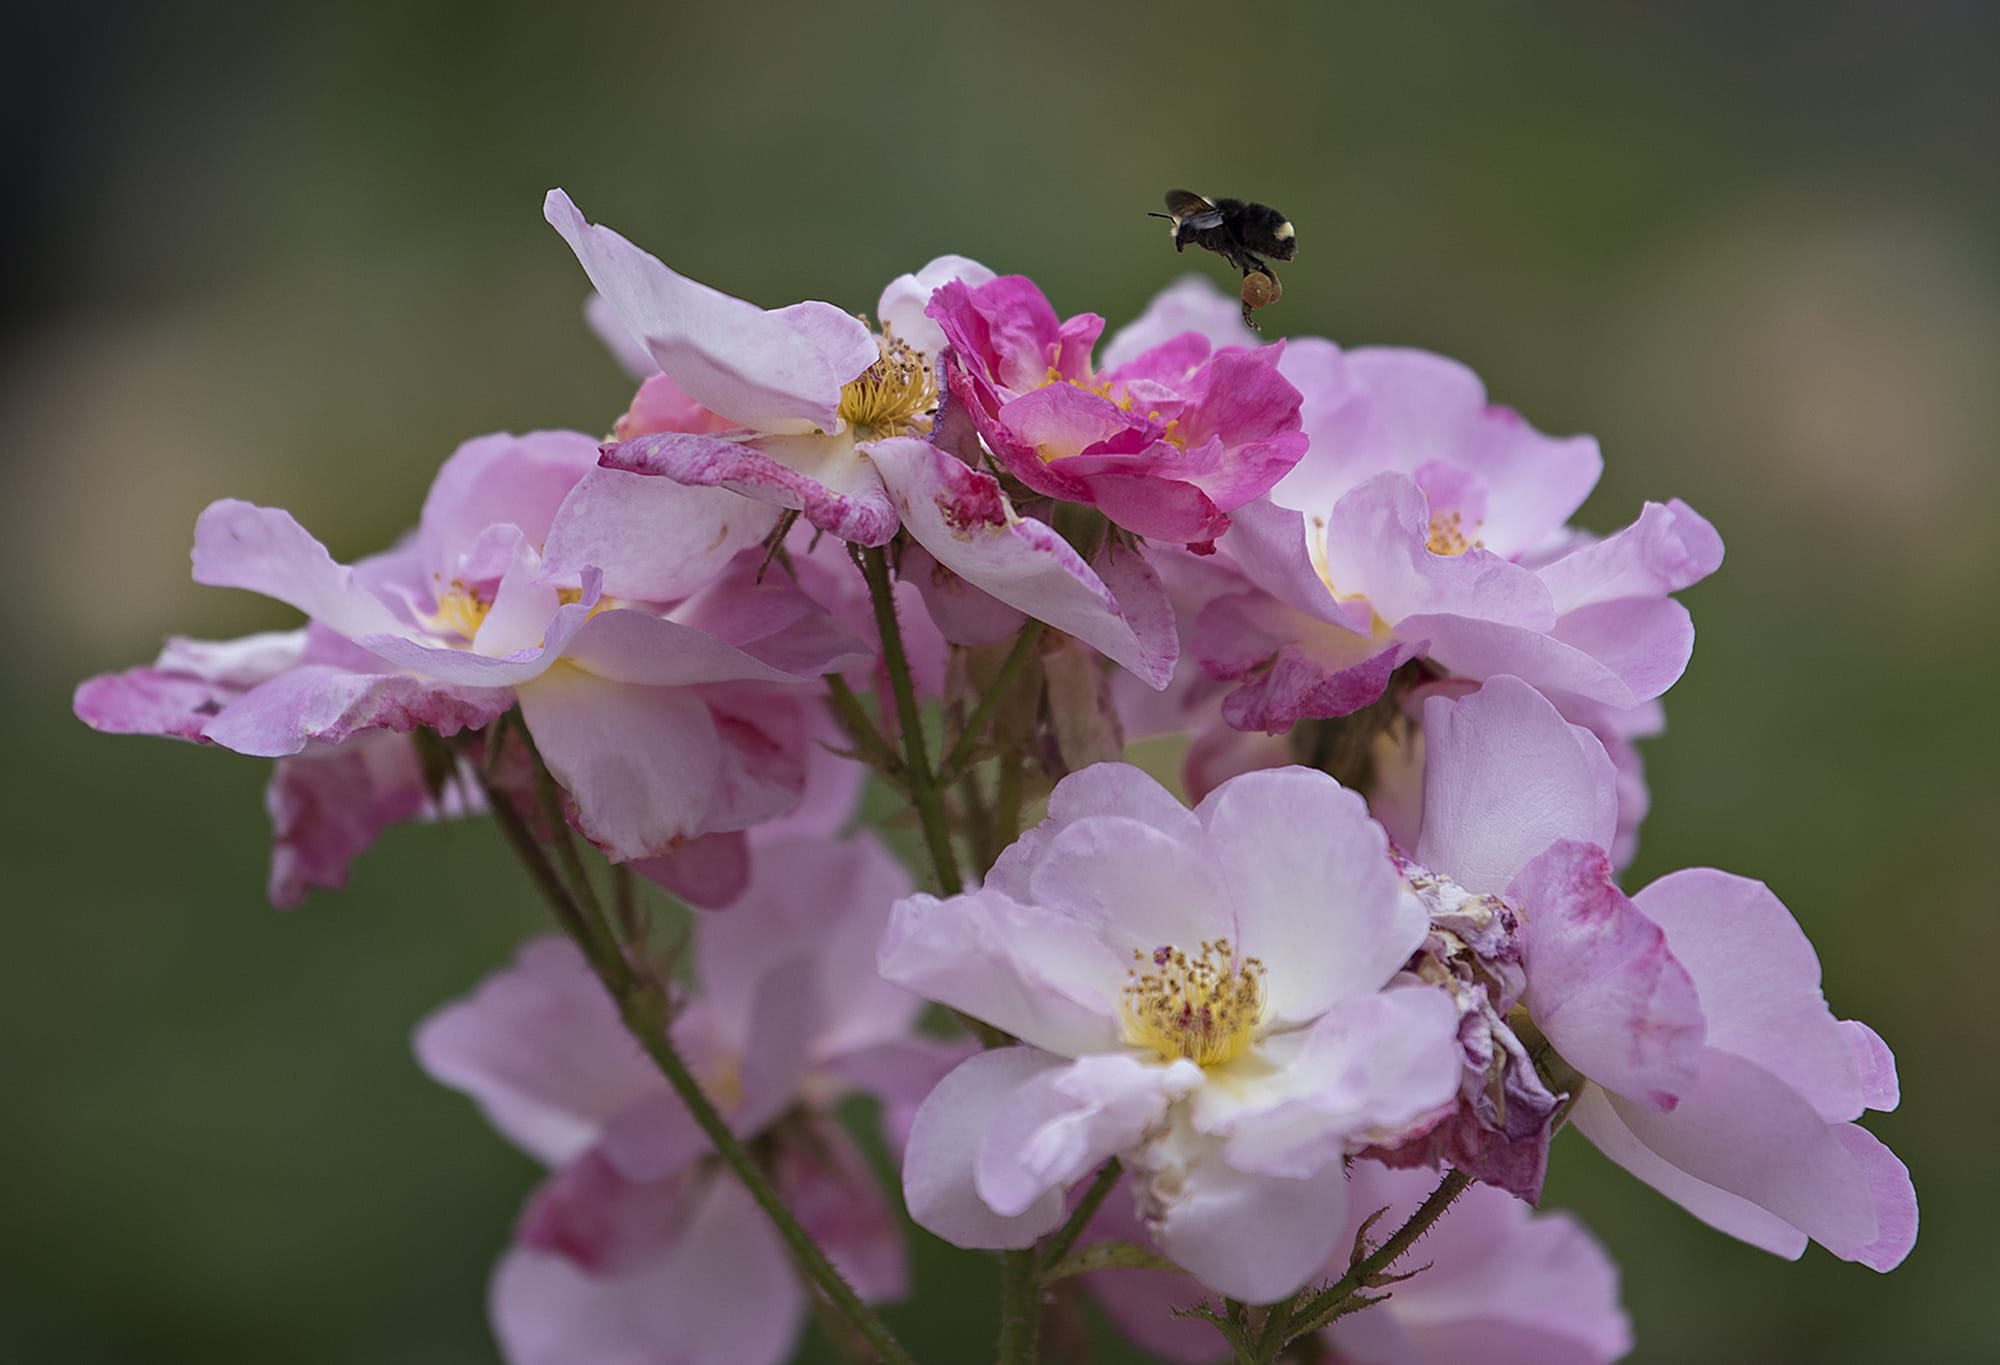 A bee takes flight from the pedal of a flower while exploring the Esther Short rose garden in downtown Vancouver on Thursday afternoon, June 7, 2018. The rose garden, which is planted and maintained by the Fort Vancouver Rose Society, is now in bloom and is a feast for the senses.